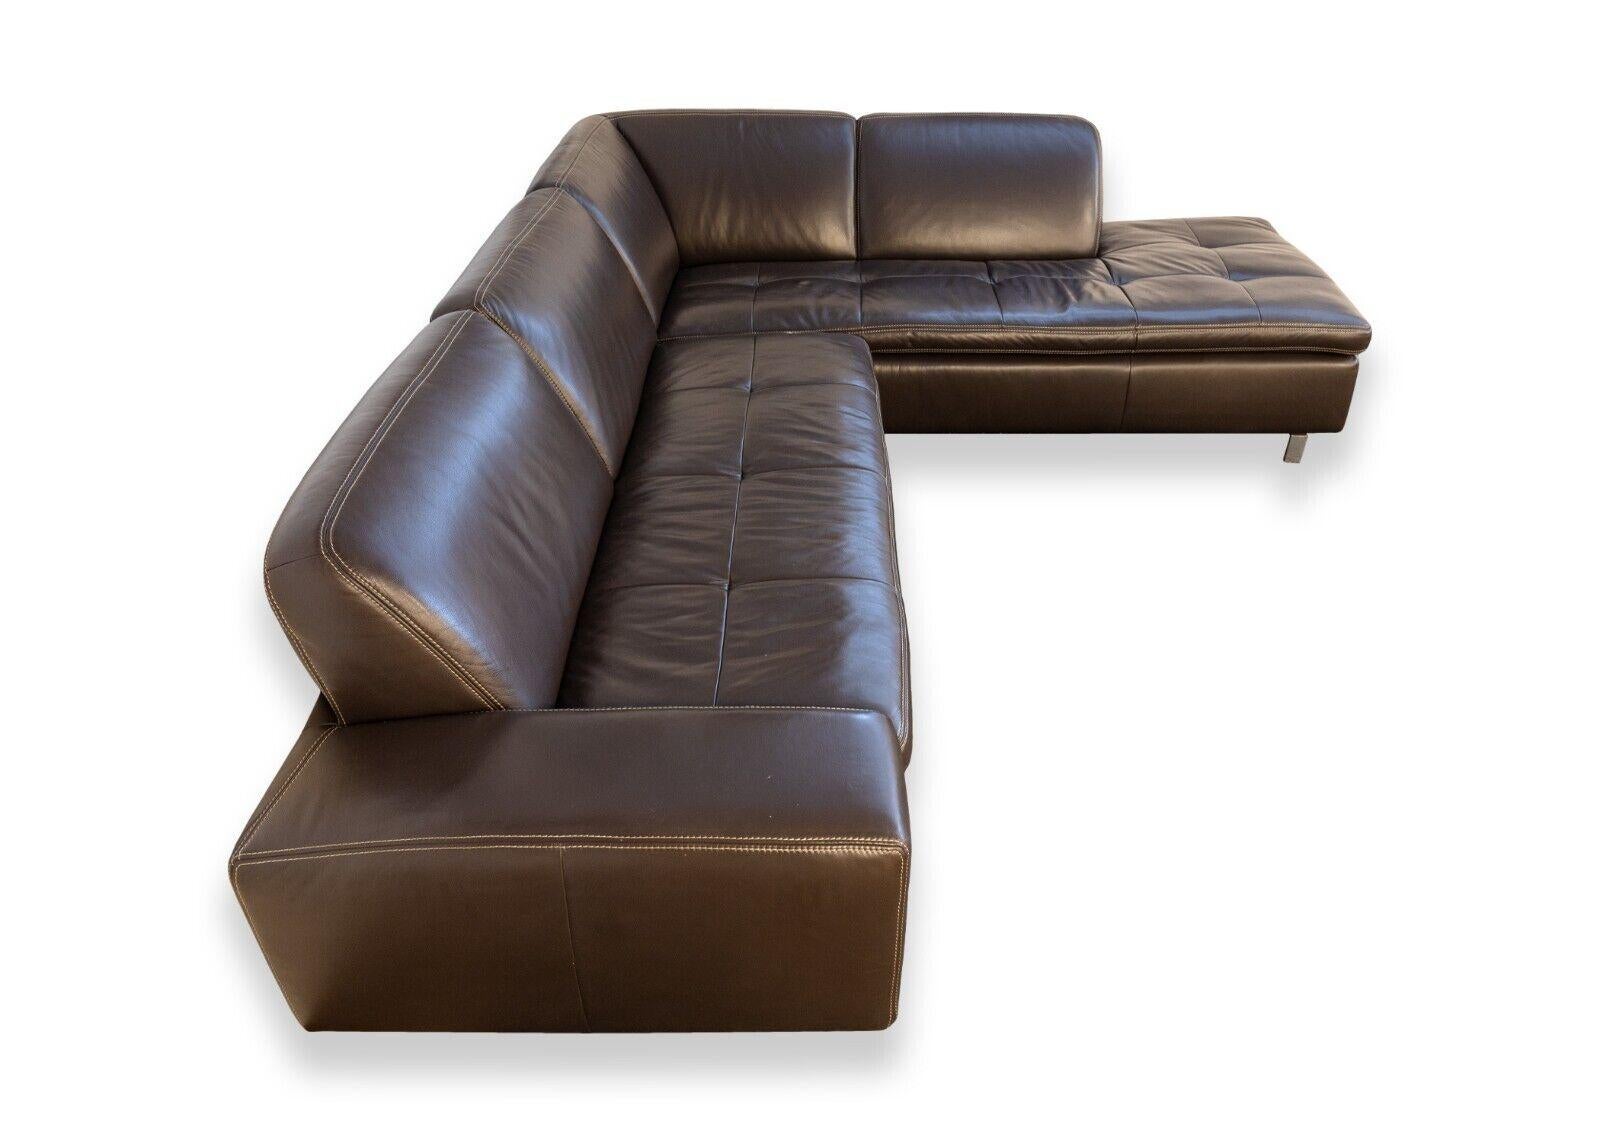 A contemporary modern W Schillig Heidelberg dark brown leather 2pc sectional sofa. An absolutely gorgeous modern sofa from German furniture manufacturer W Schillig, based in Ebersdorf, Upper Franconia, Germany. This piece, from their Heidelberg line